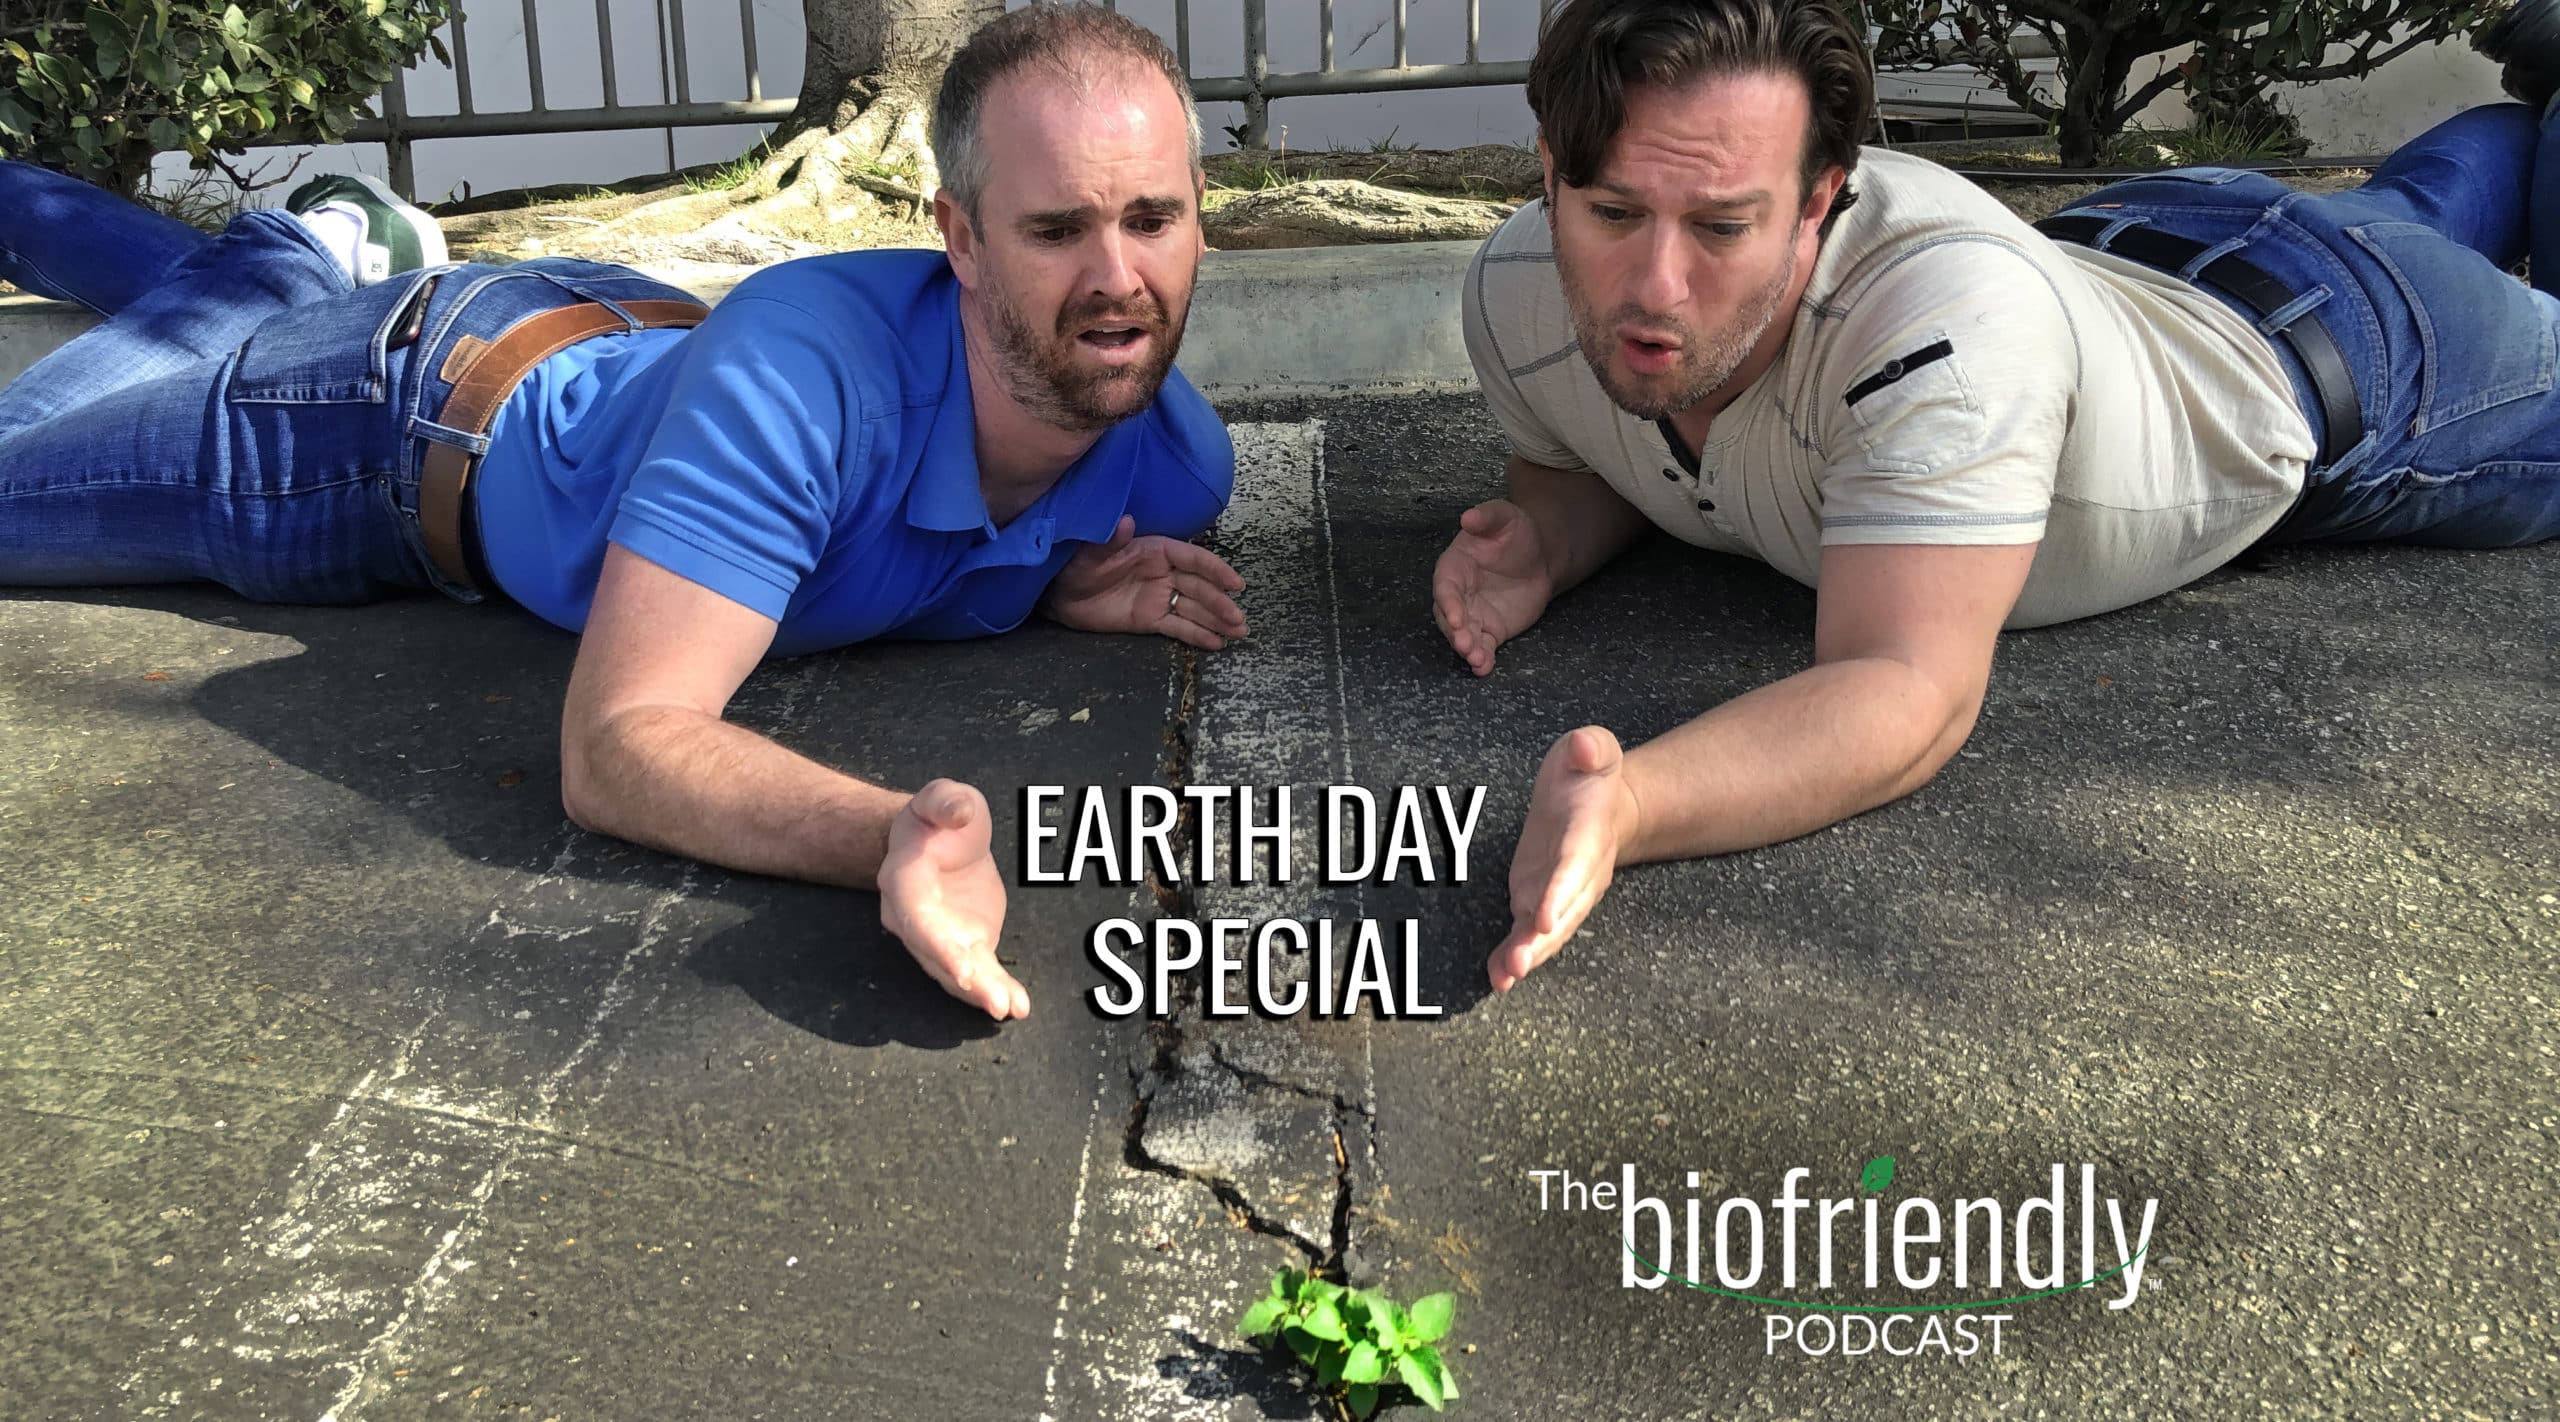 The Biofriendly Podcast - Episode 8 - Earth Day Special